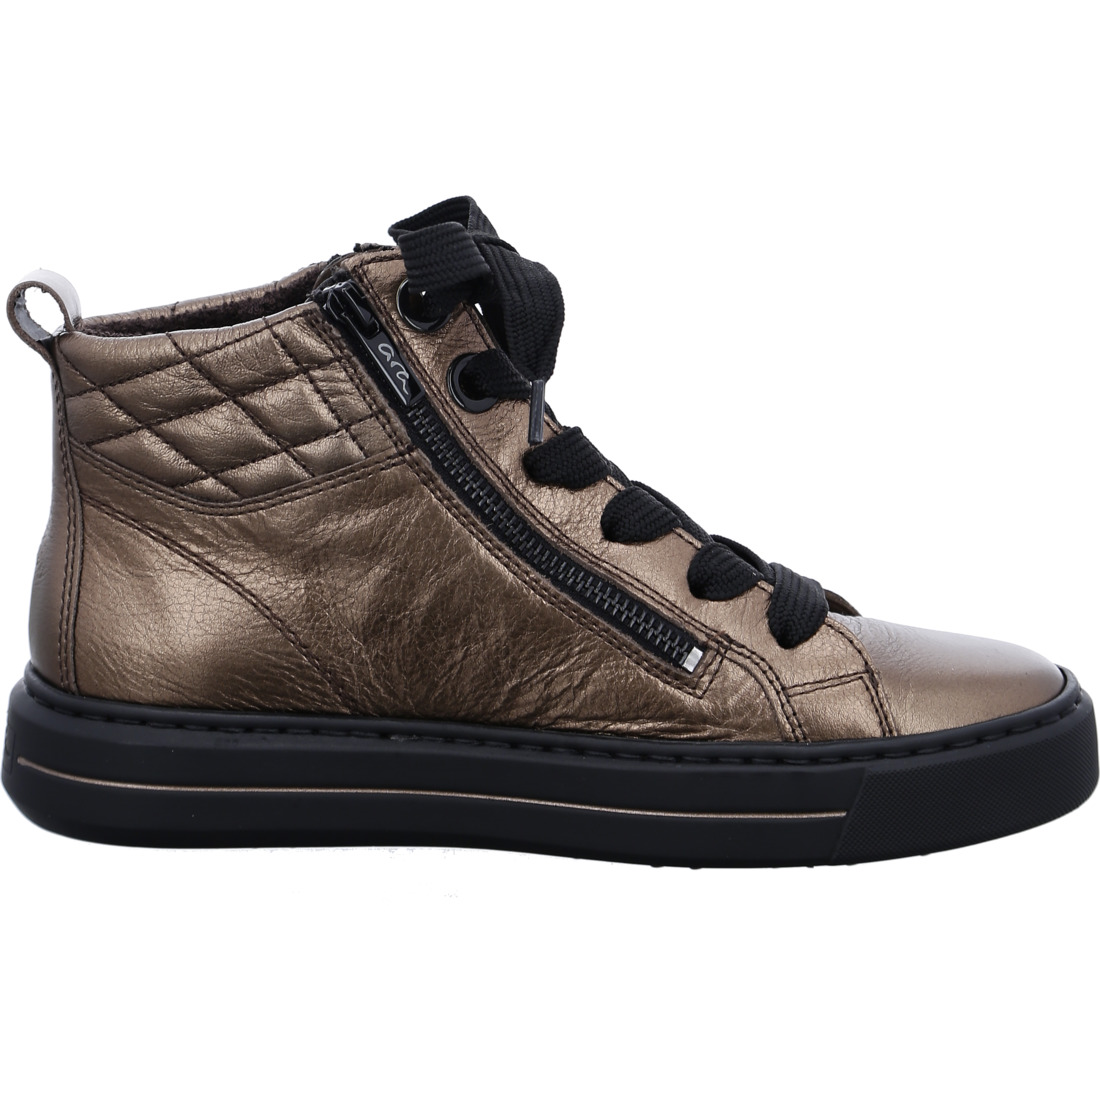 Stiefelette Courtyard - Moro smooth leather